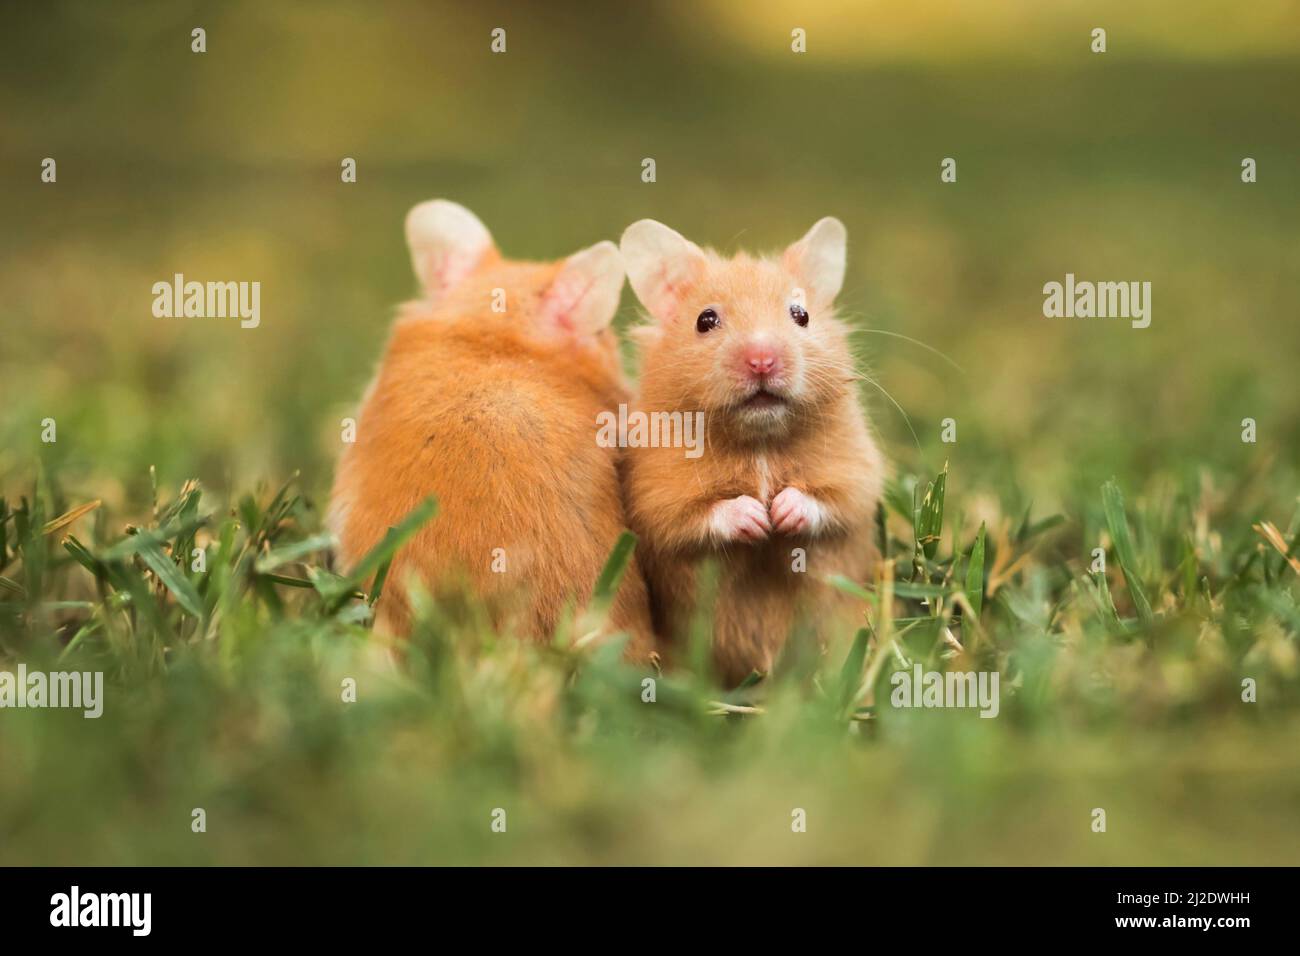 golden hamster or Syrian hamster, (Mesocricetus auratus) on the lawn Stock Photo